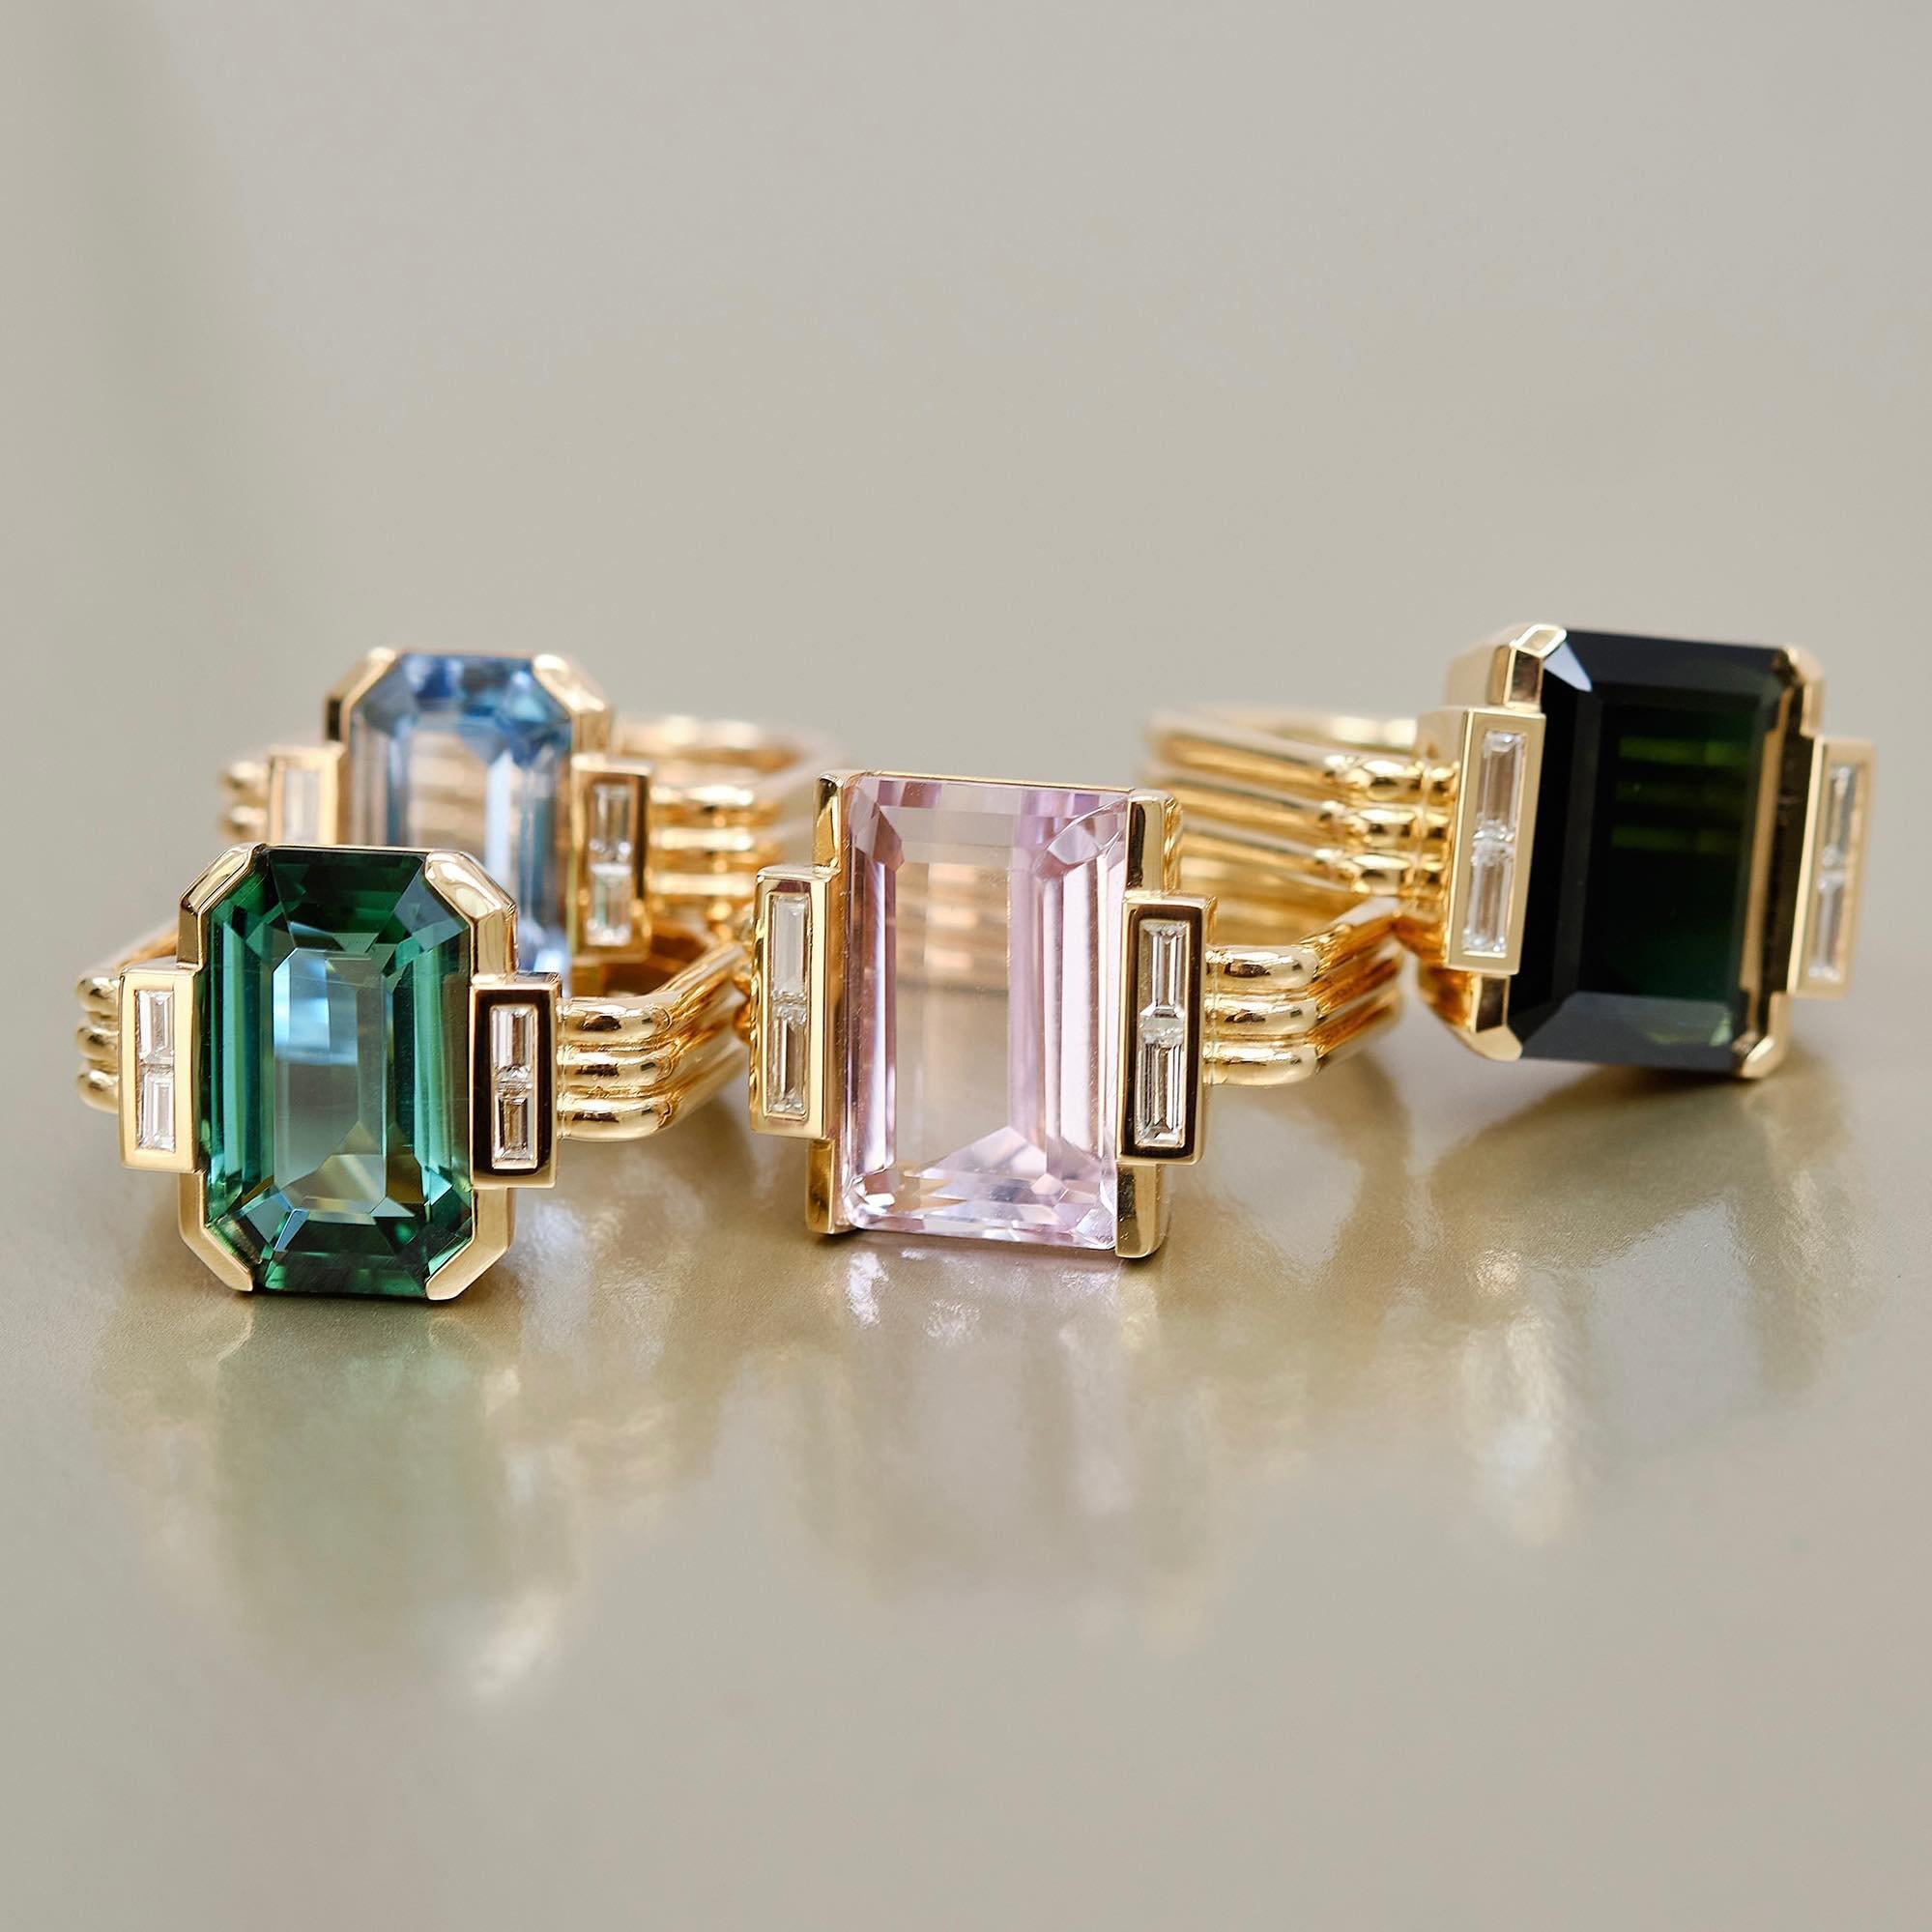 Pompidou collection. Rings set with sparkly gemstones. Each piece is unique. Choose your own.